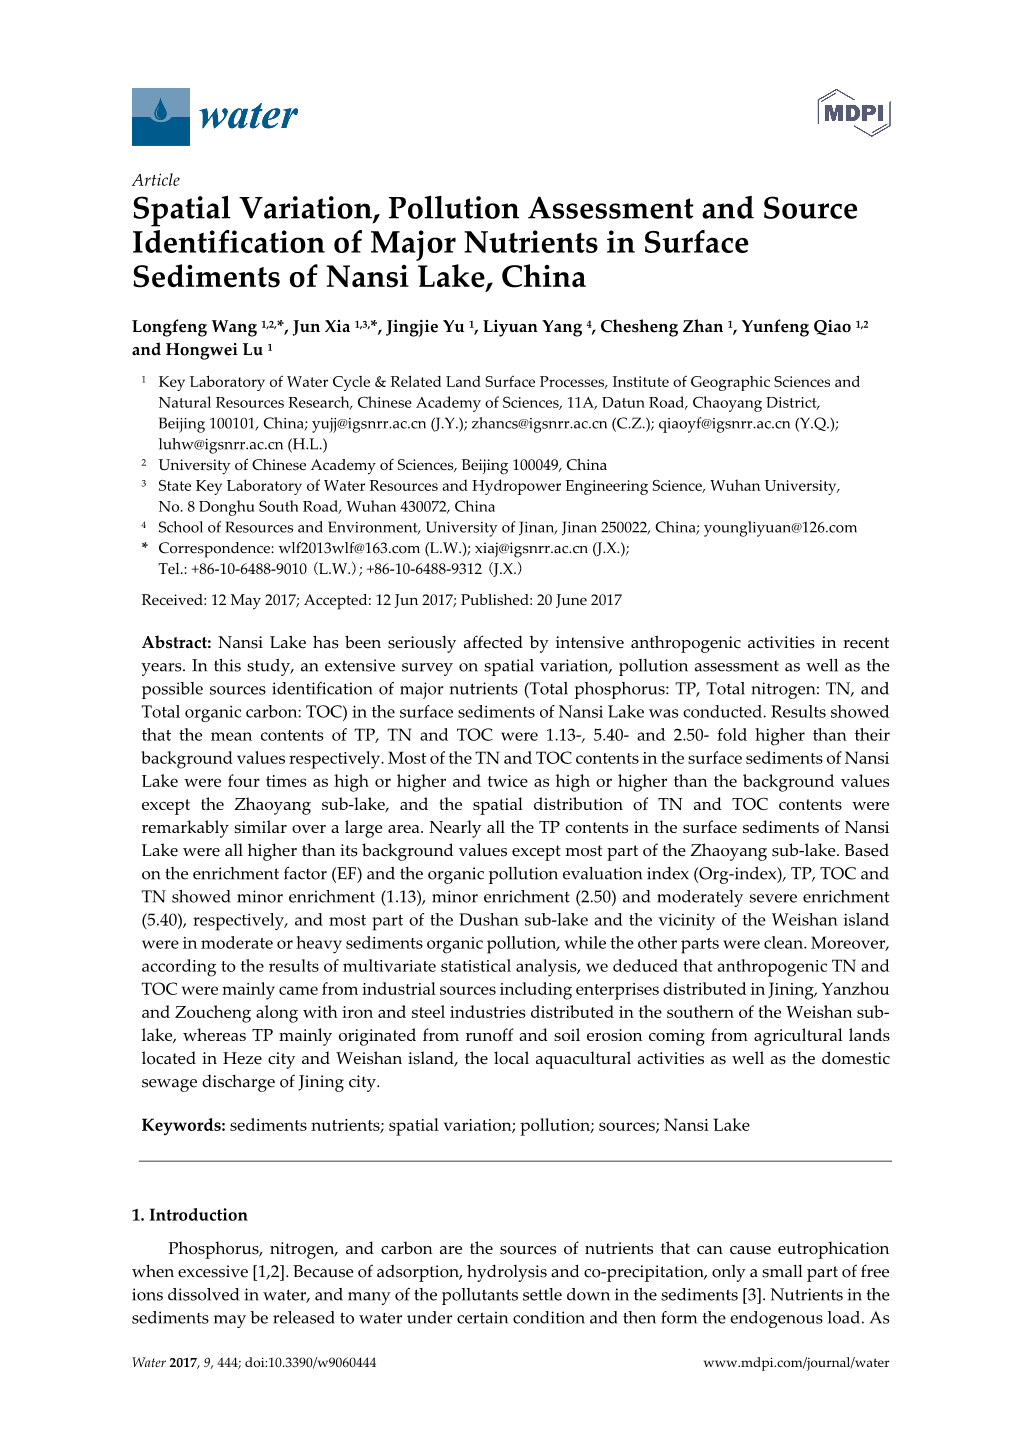 Spatial Variation, Pollution Assessment and Source Identification of Major Nutrients in Surface Sediments of Nansi Lake, China